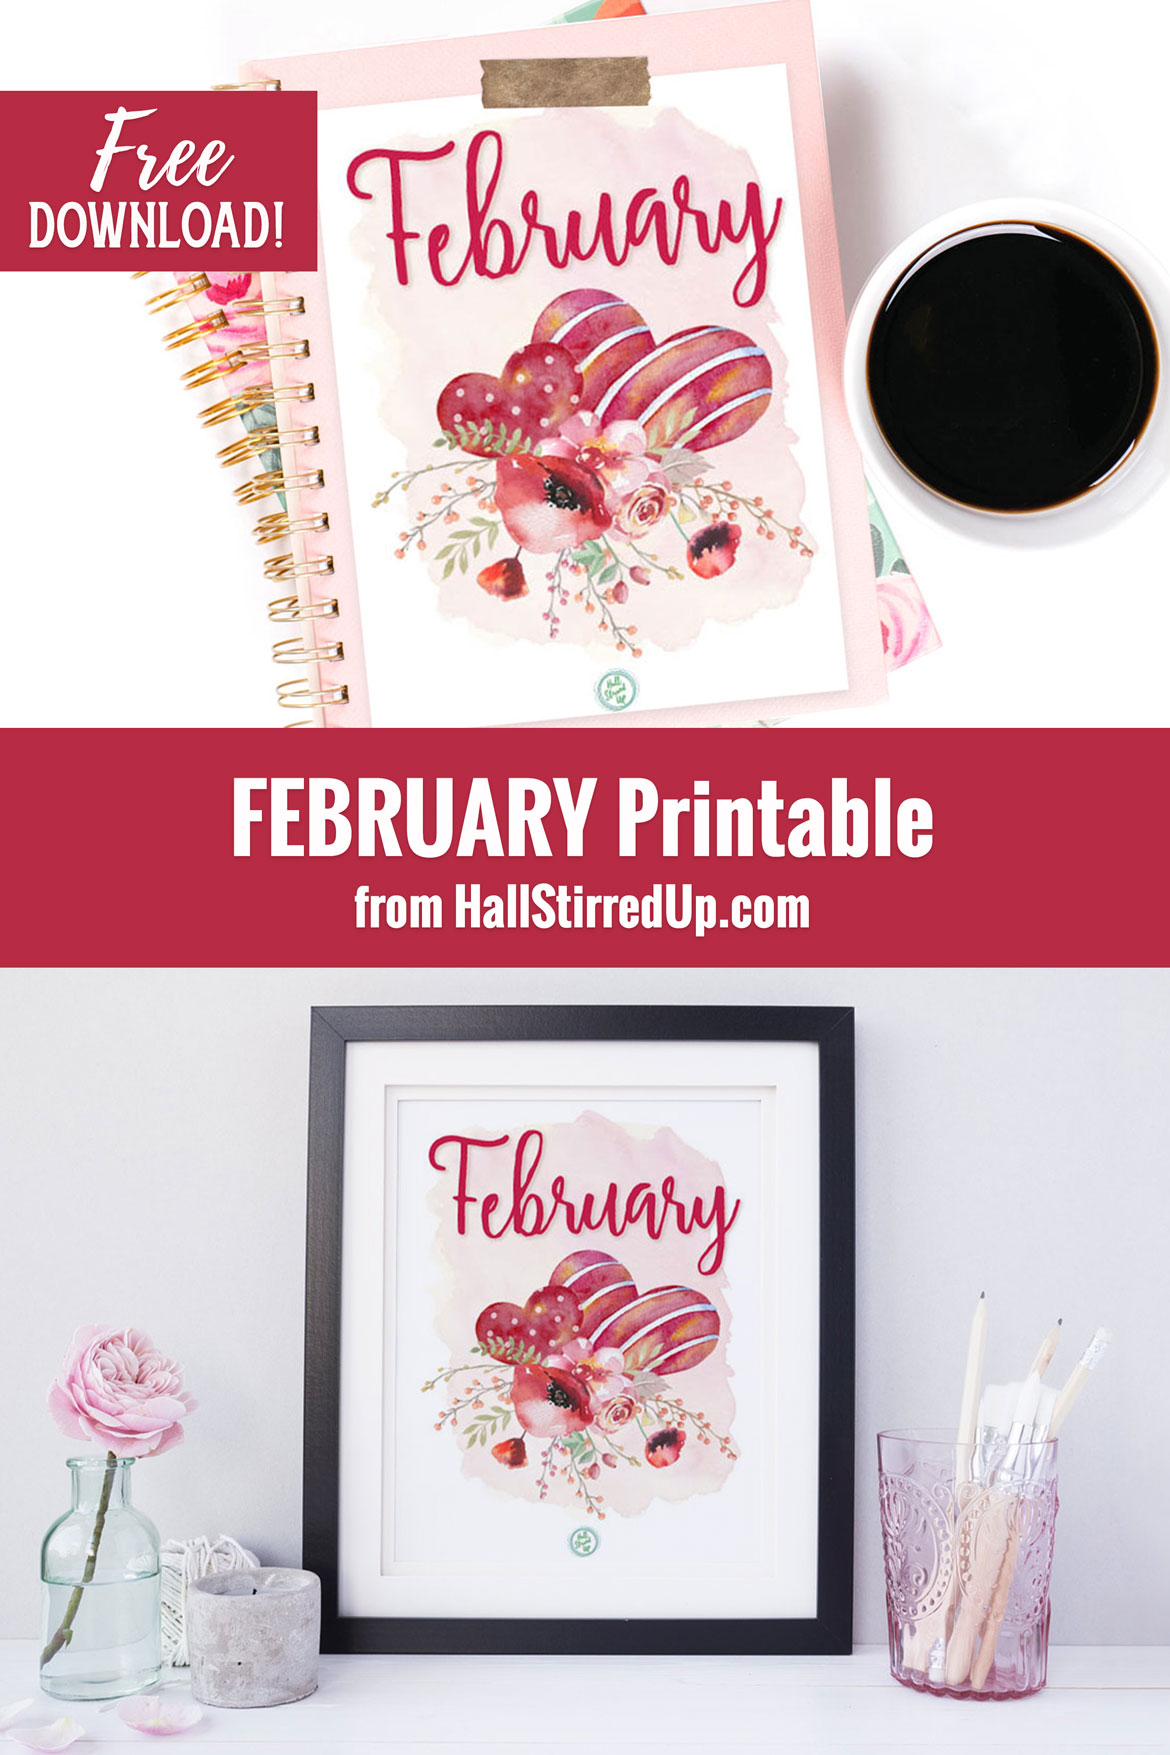 Free for you February Hearts and Flowers printable